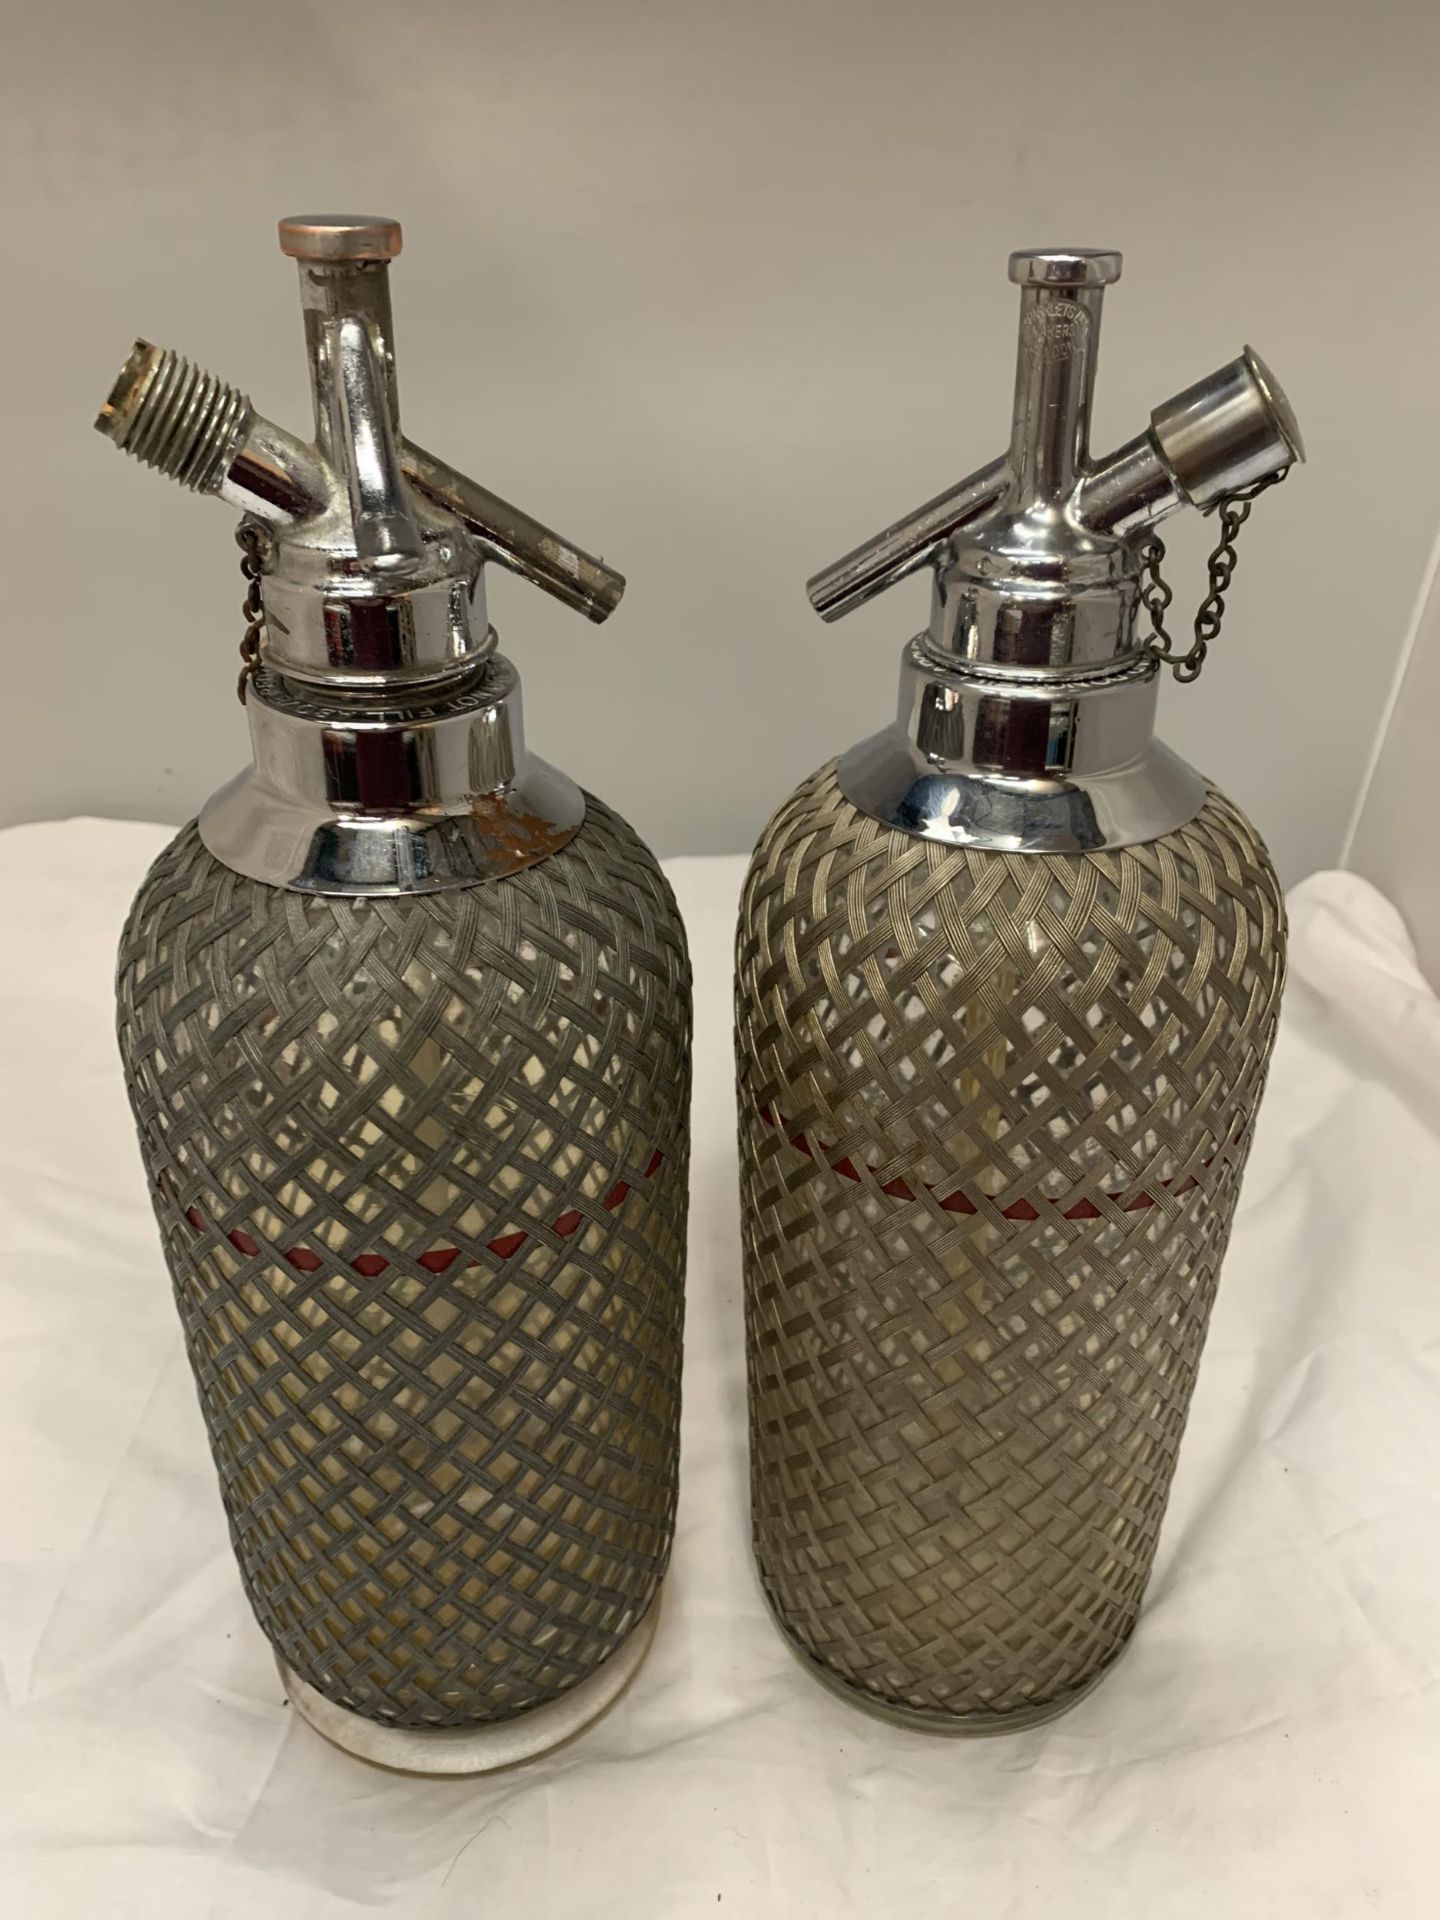 TWO SODA SYPHONS WITH WIRE STYLE MESH COVERING, MADE IN ENGLAND